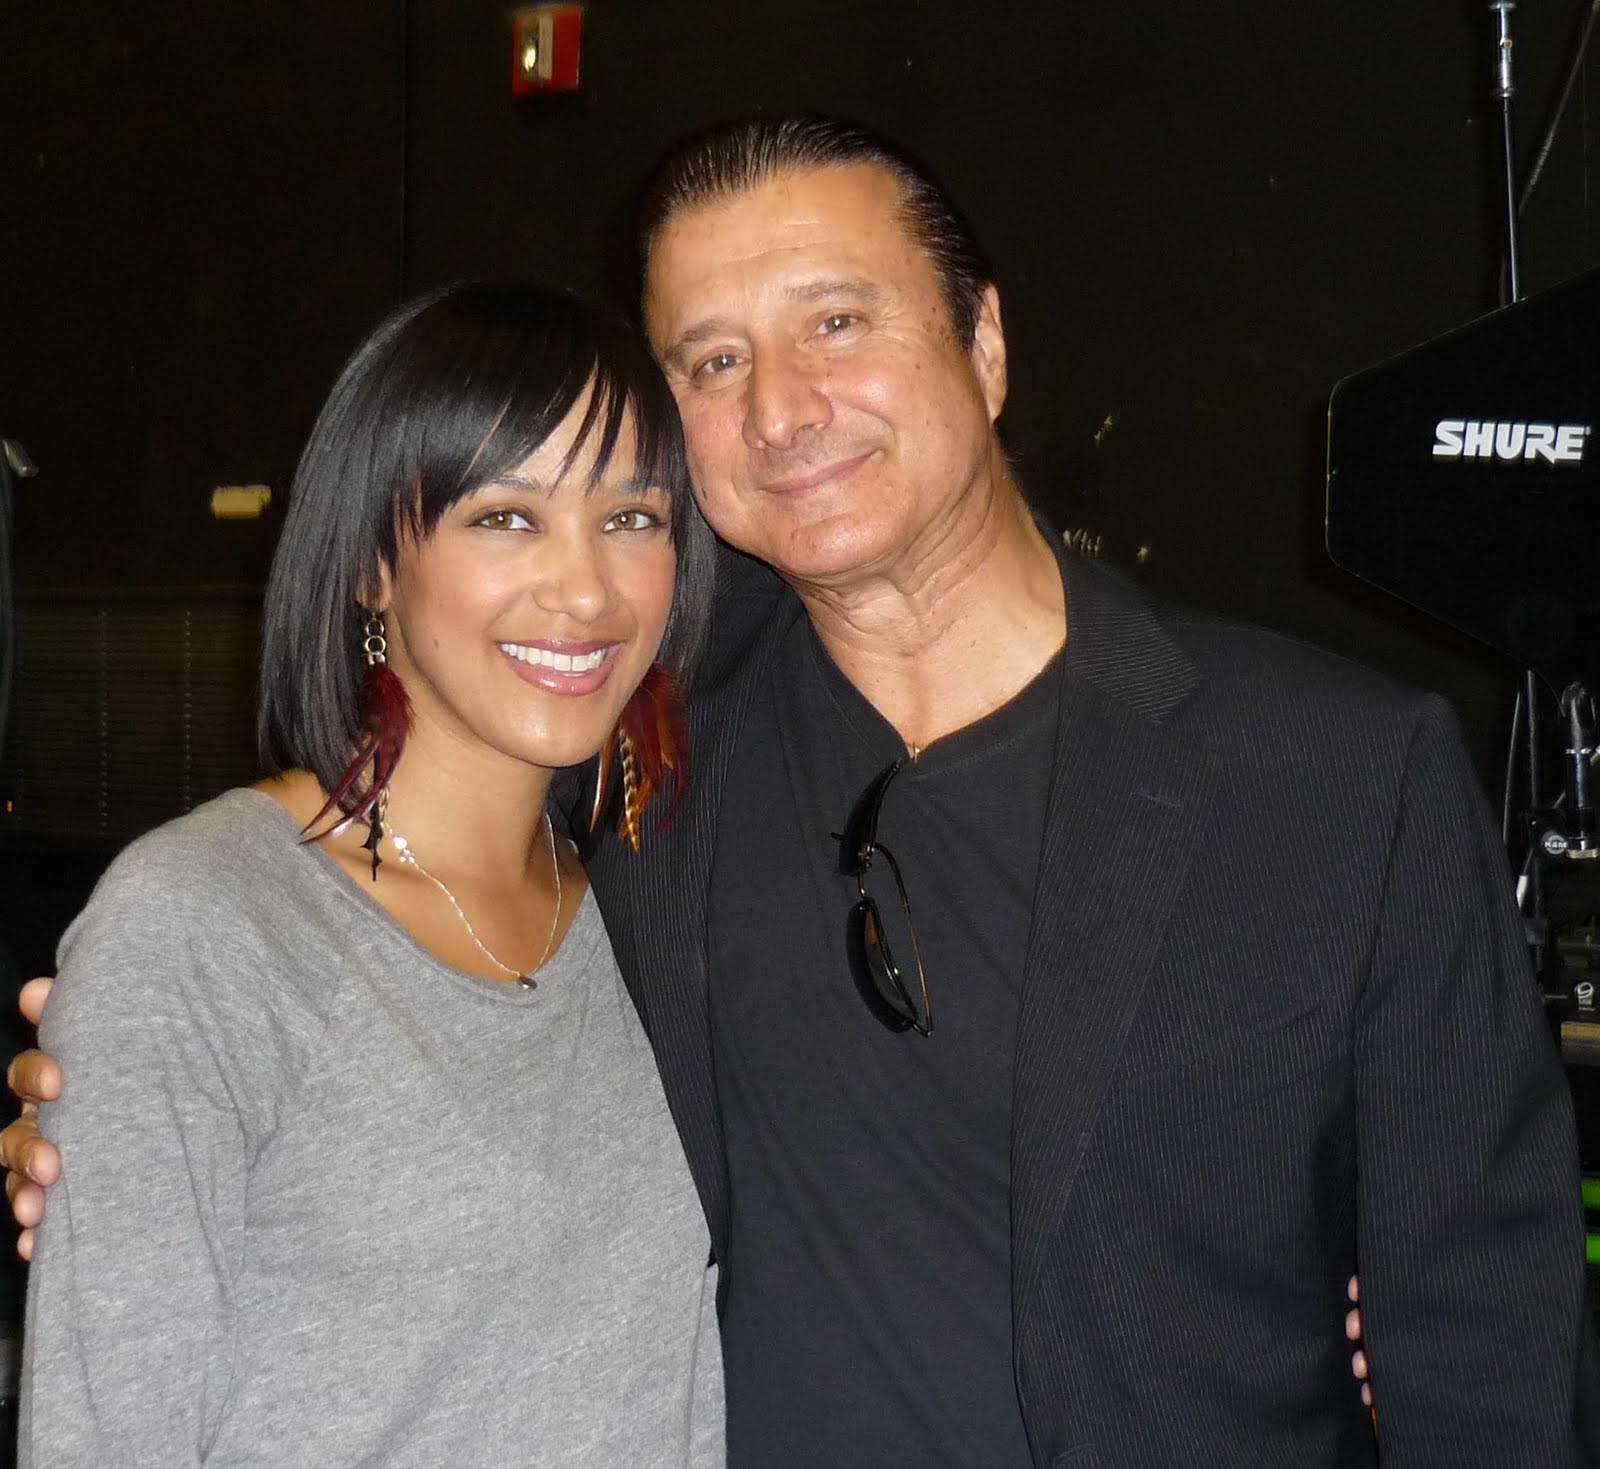 A Singing Gypsy... Steve Perry is in the building...